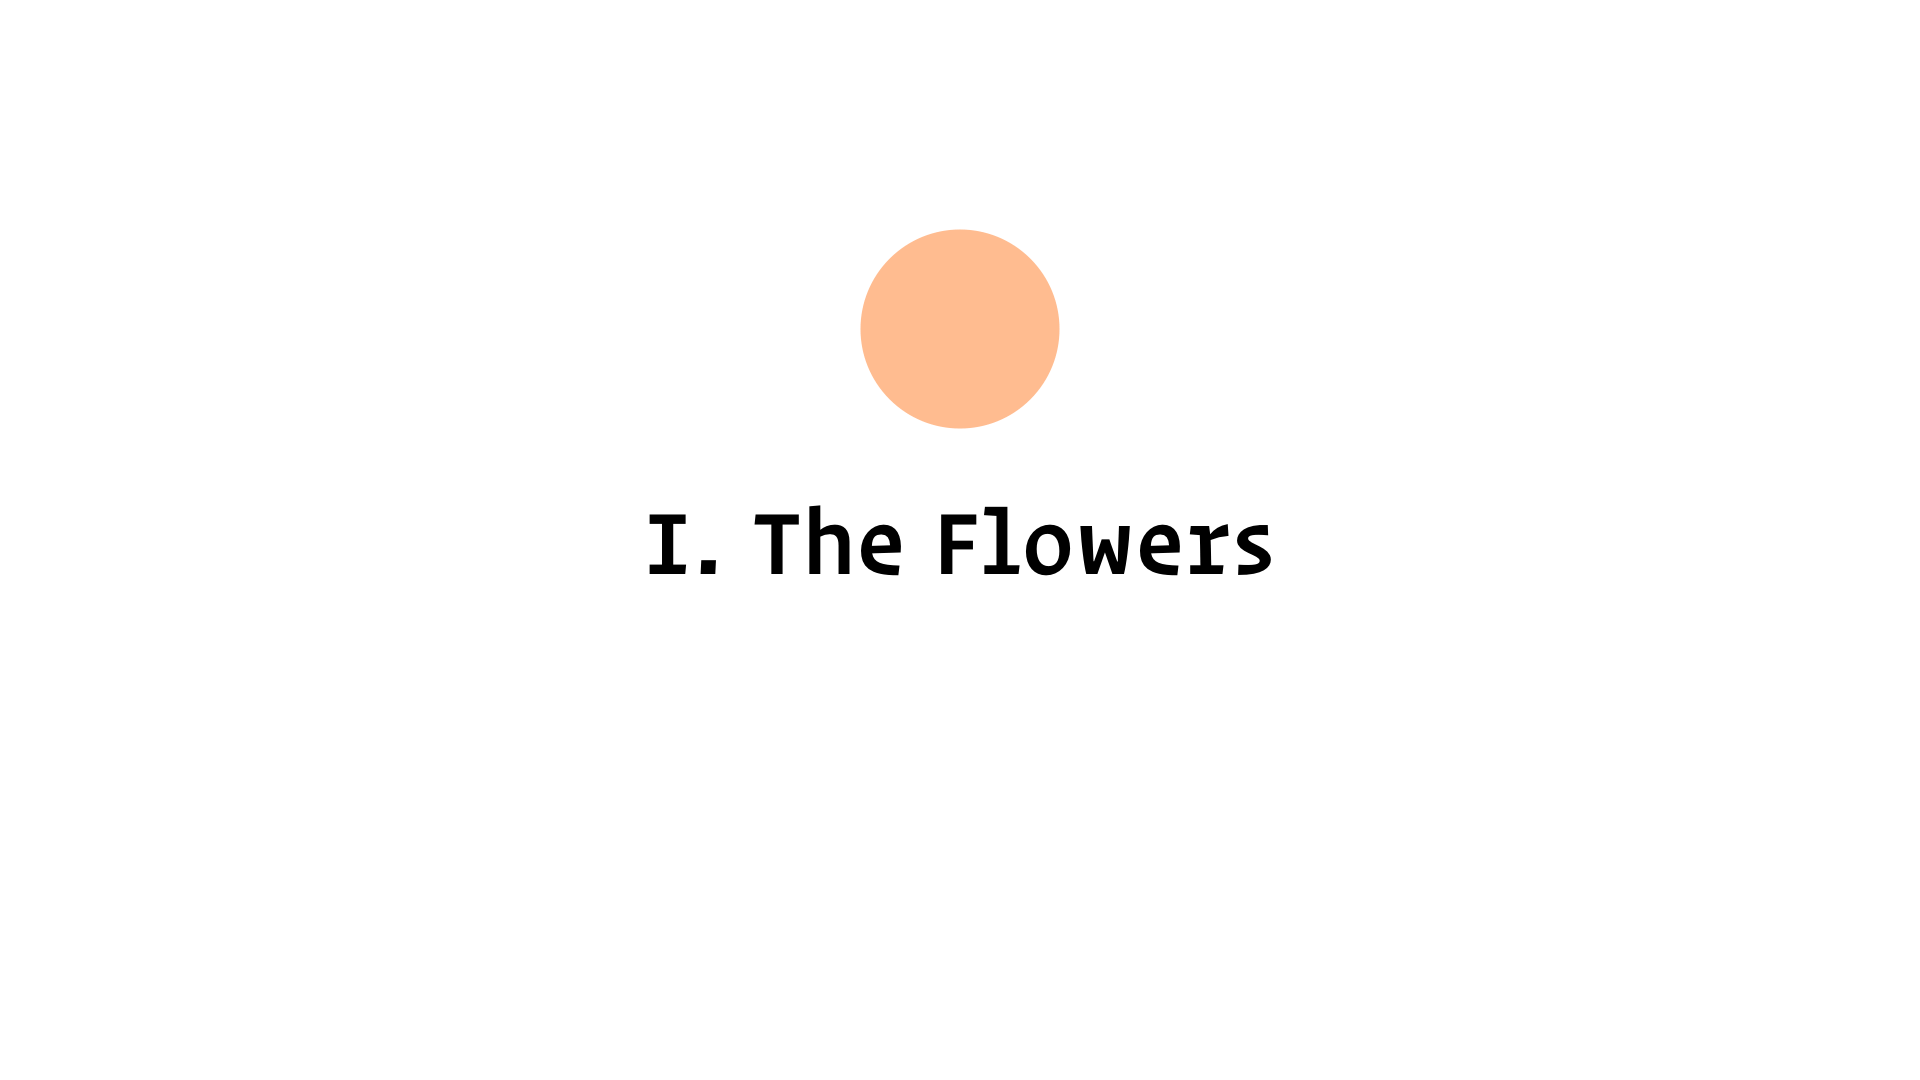 I. The Flowers